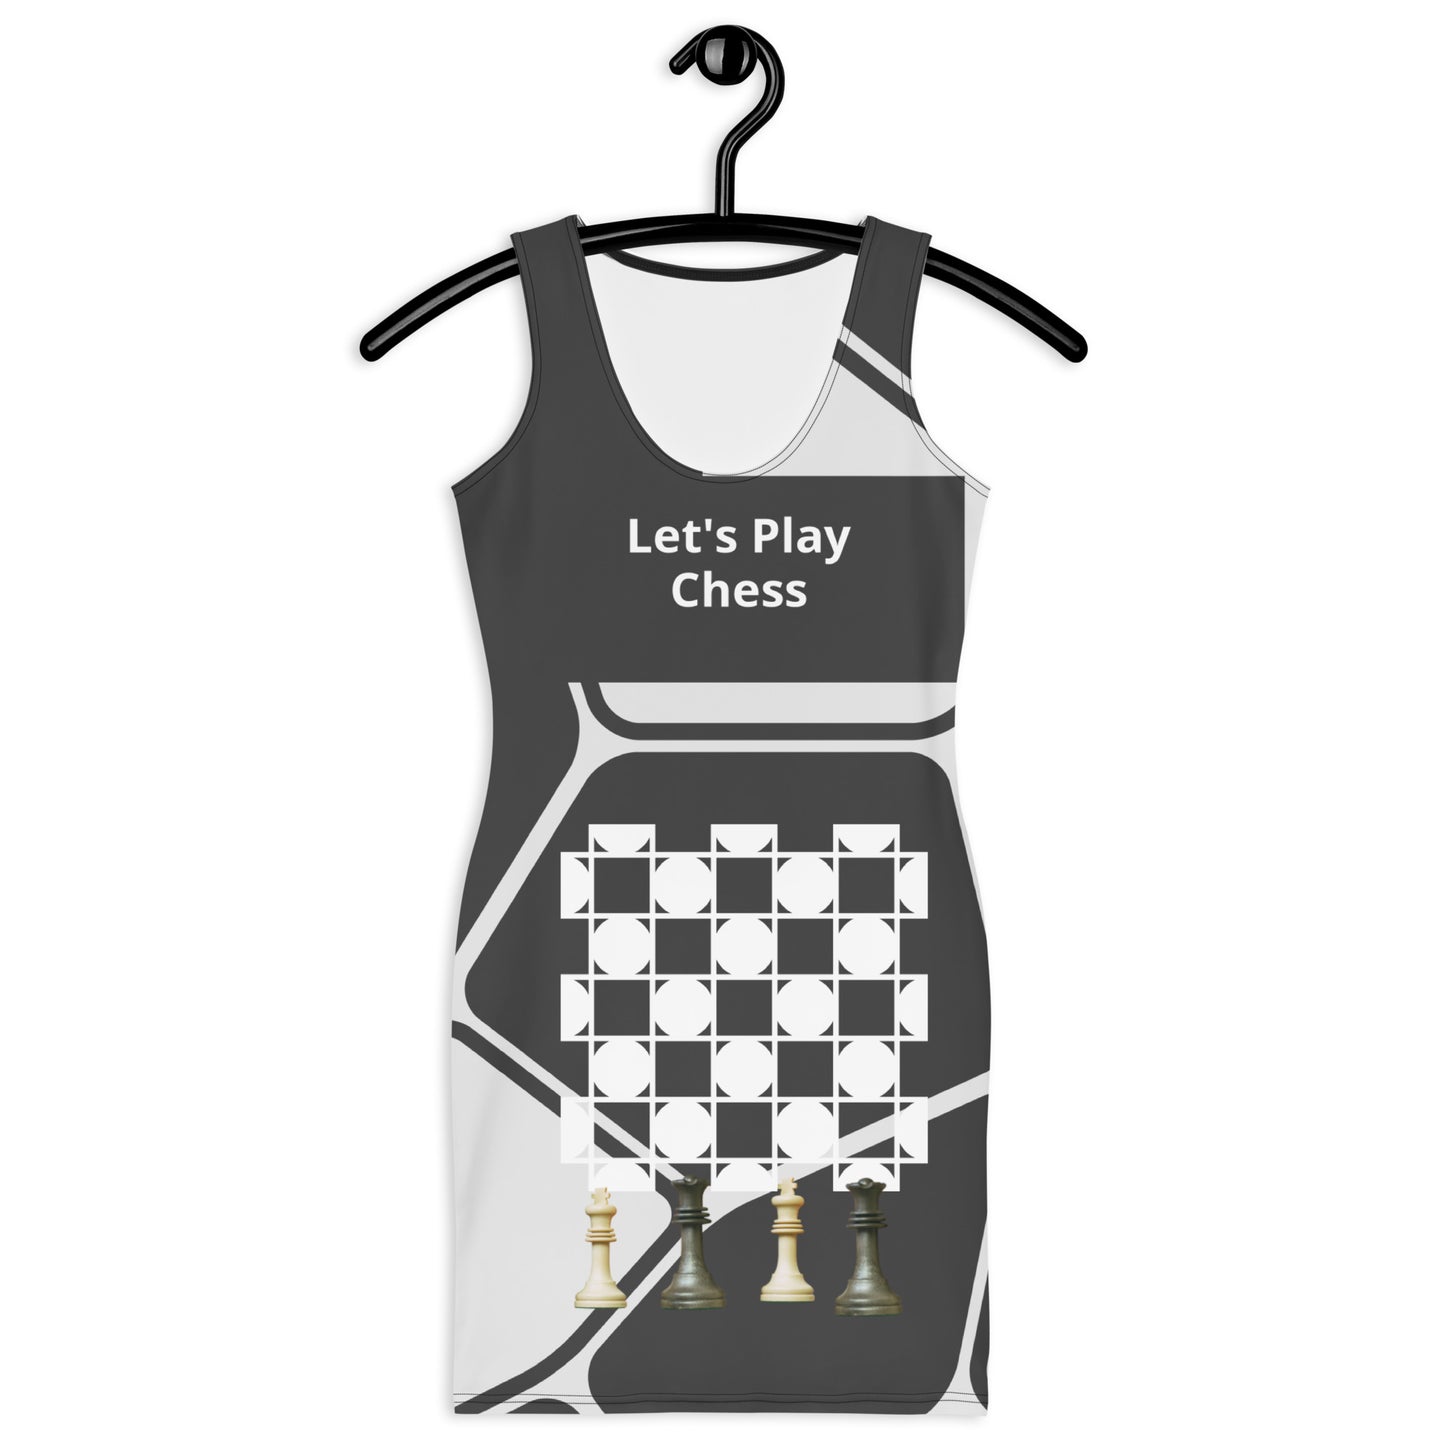 Let's Play Chess-Dress